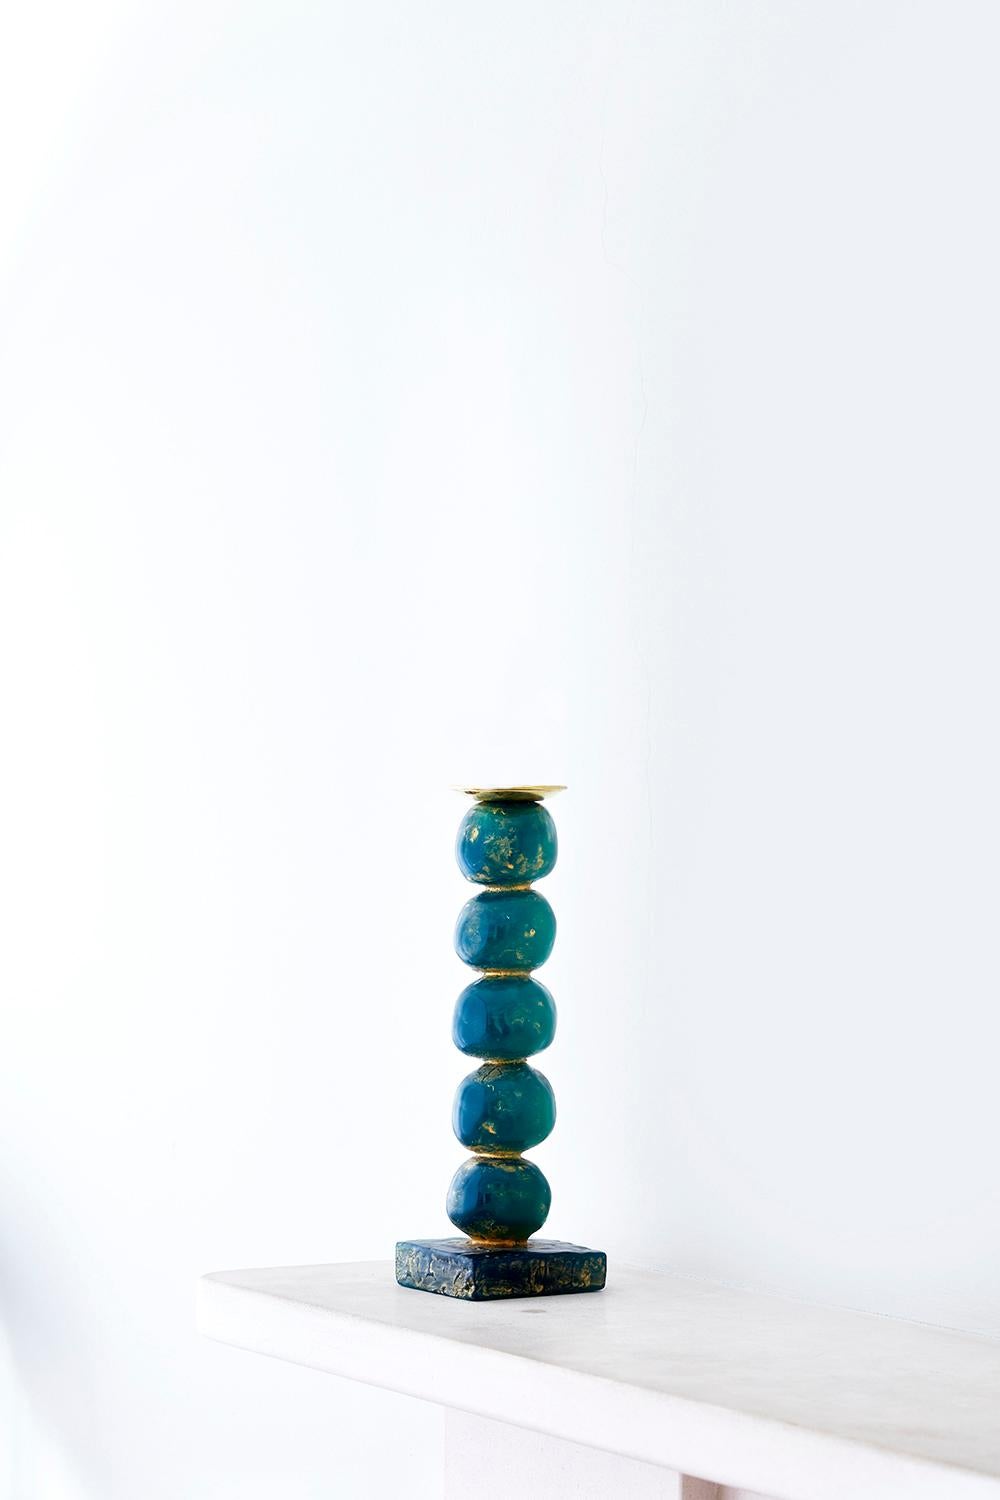 Margit Wittig has used her sculptural skills to create beautifully-crafted, well-proportioned candlesticks, which are compositions of her unique signature pearl-shaped designs.

Each candlestick begins as hand-sculpted spheres which are used to